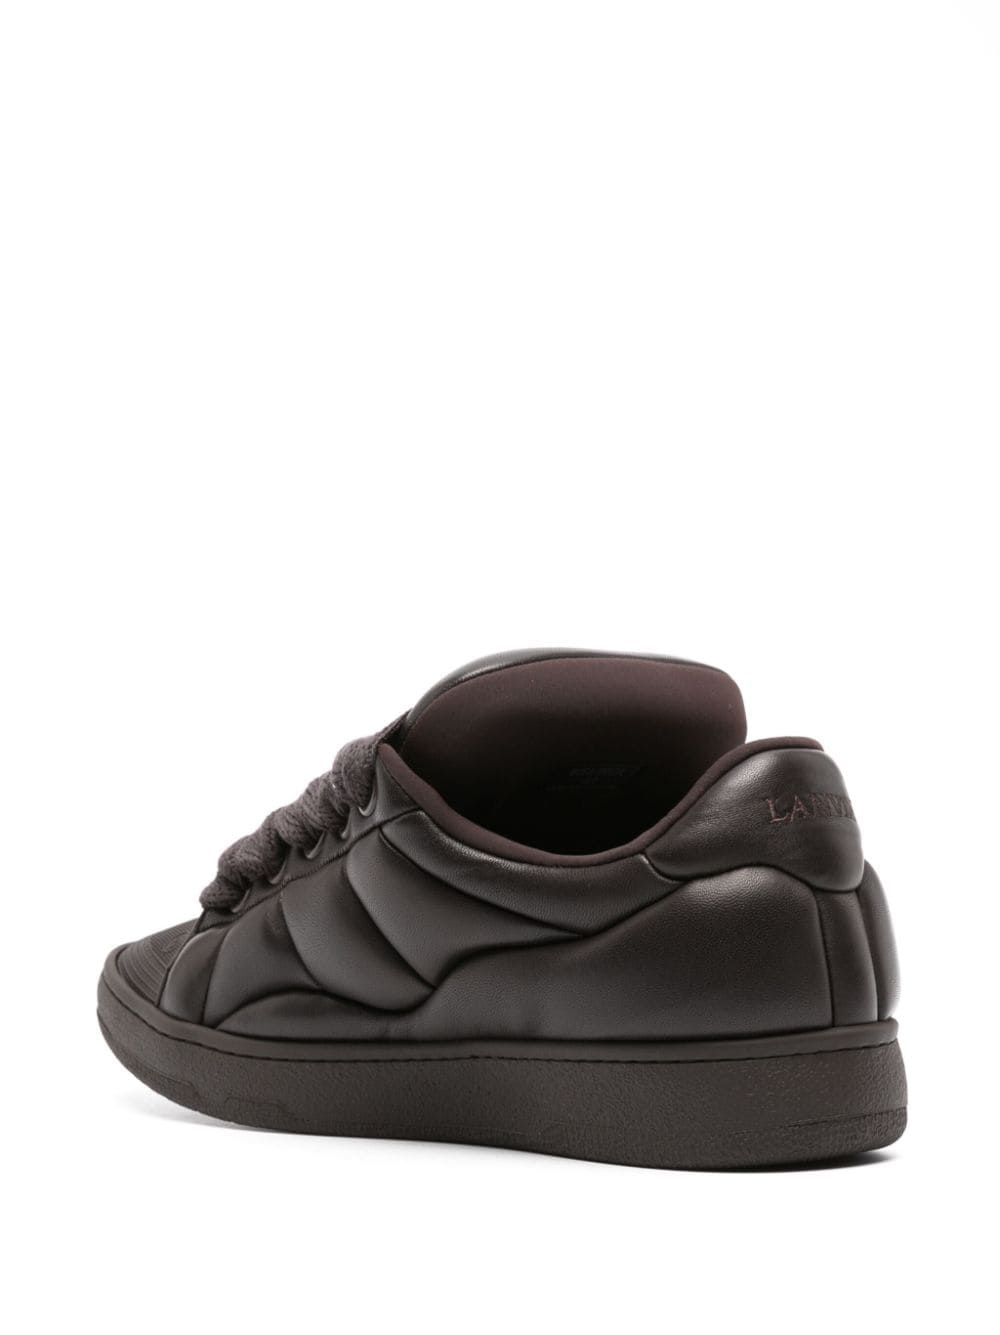 Curb XL leather sneakers - 3